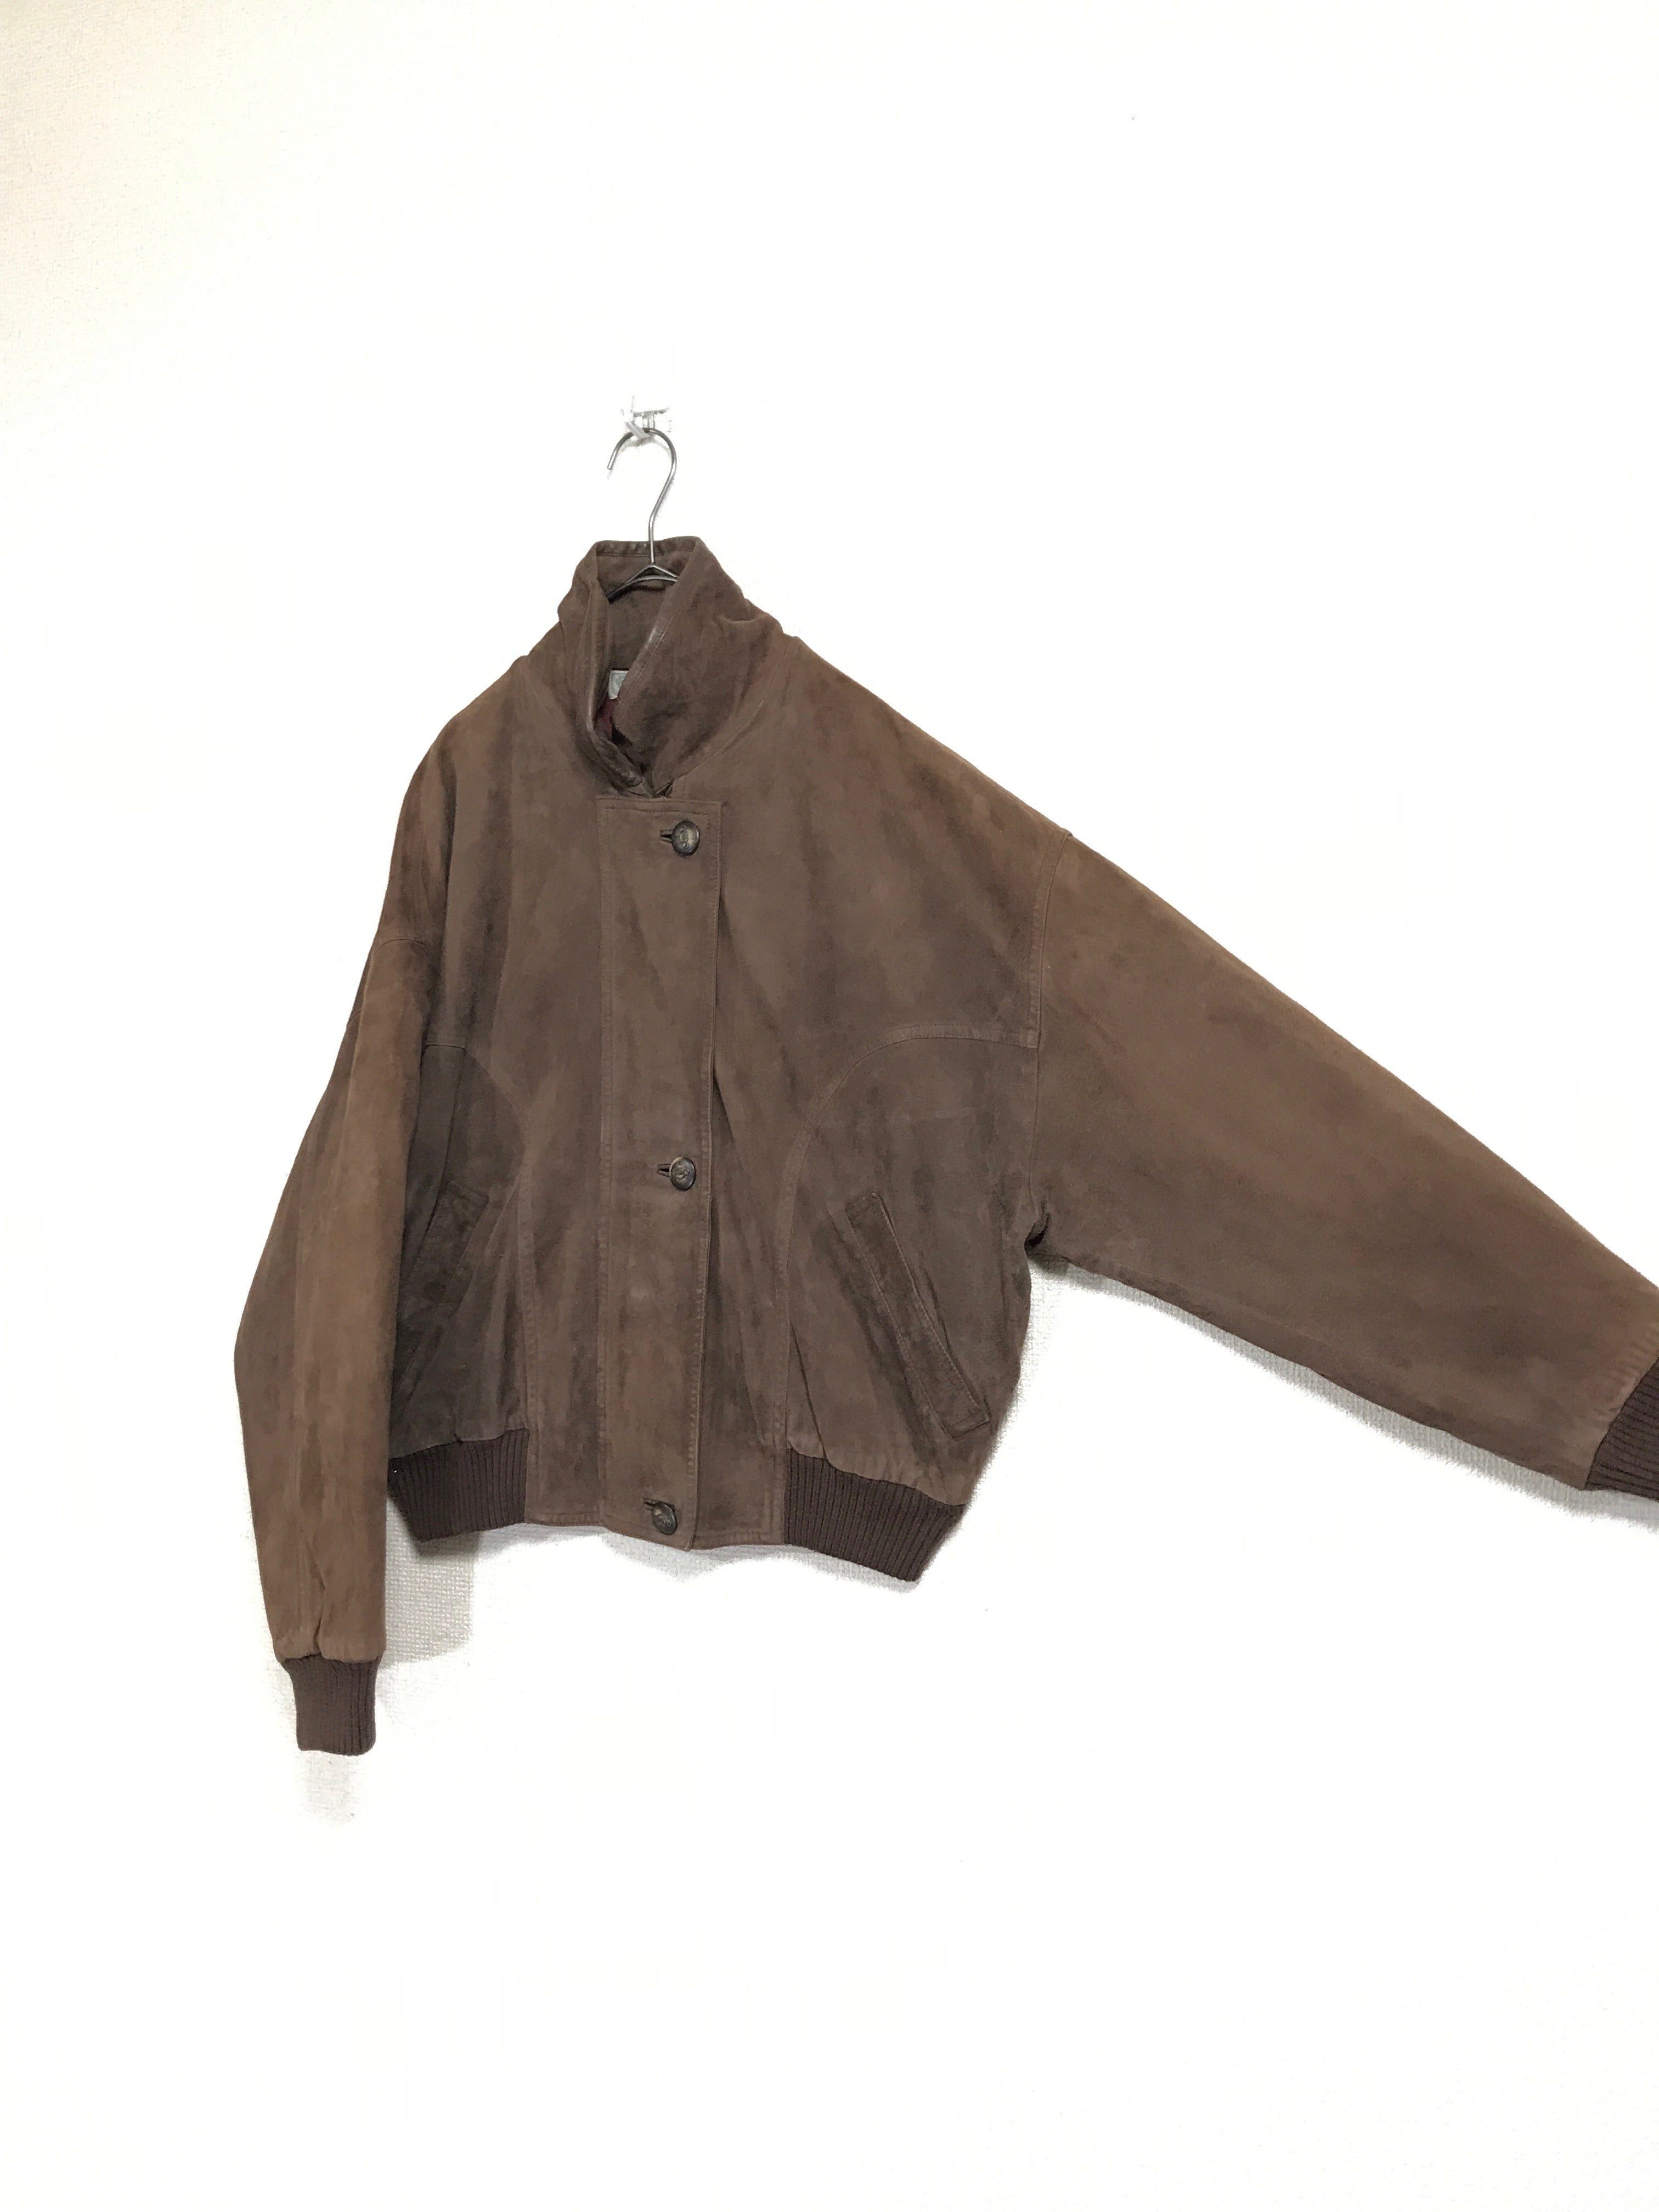 80’s GUCCI suede leather blouson